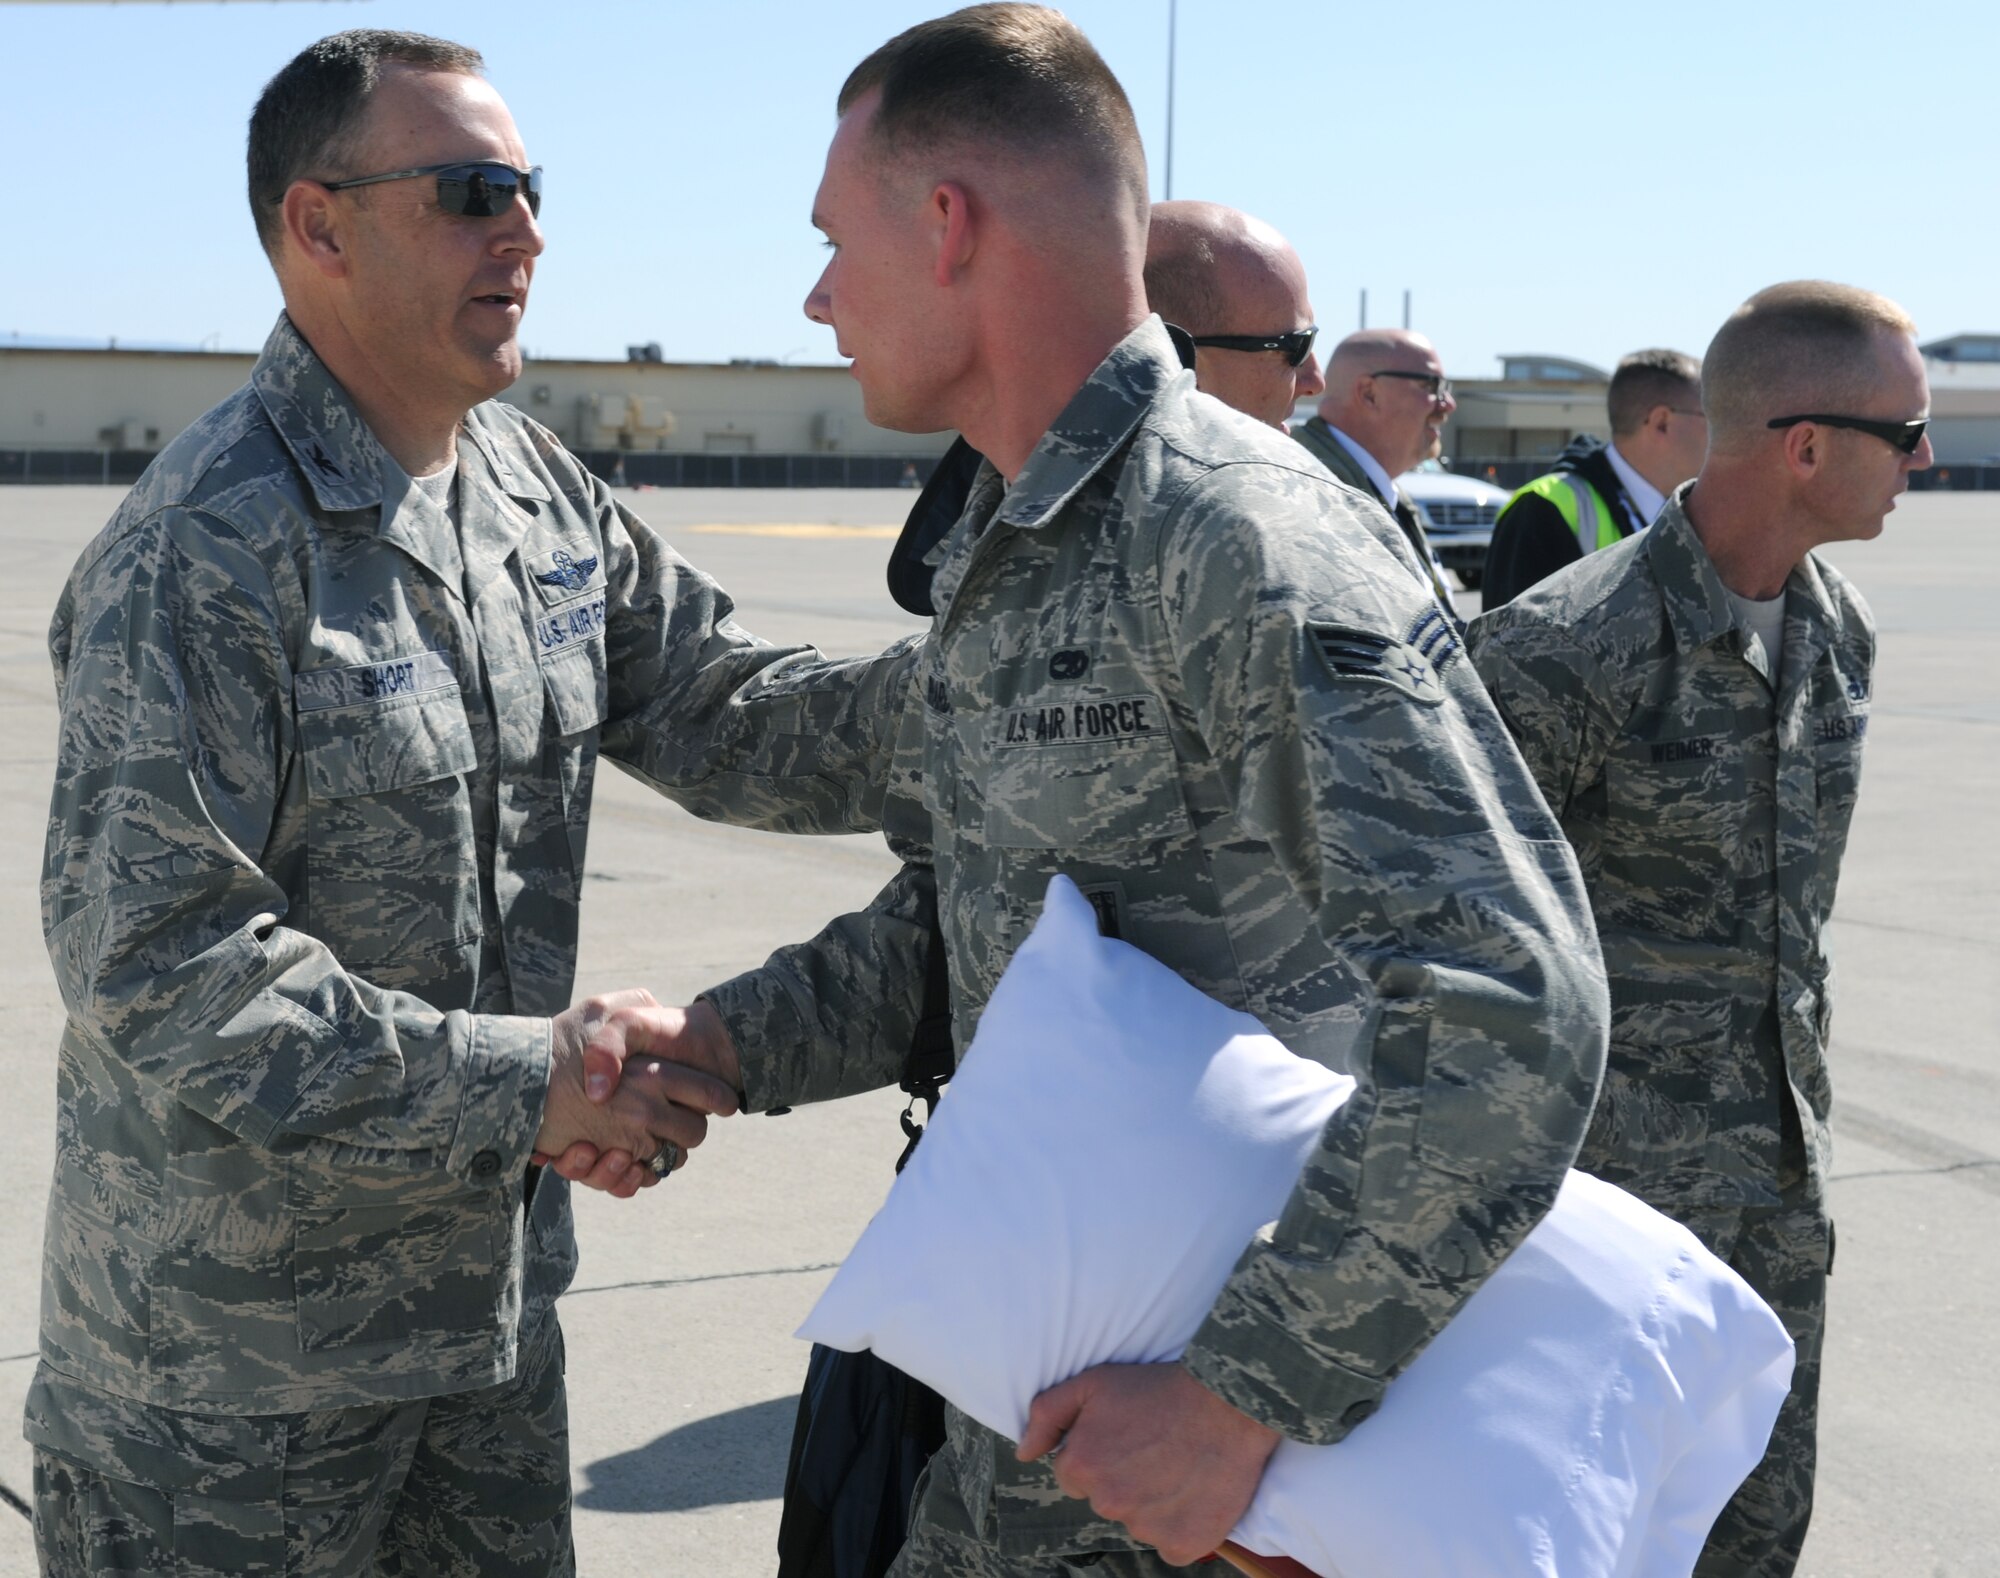 U.S. Air Force Col. Chris Short, 366th Fighter Wing commander, shakes the hand of a deploying Airman before he boards a plane April 23, 2013, at Mountain Home Air Force Base, Idaho. Several months of training has been conducted in preparation for this specific mission and Airmen are ready to take on the challenge. (U.S. Air Force photo by Senior Airman Benjamin Sutton/Released) 